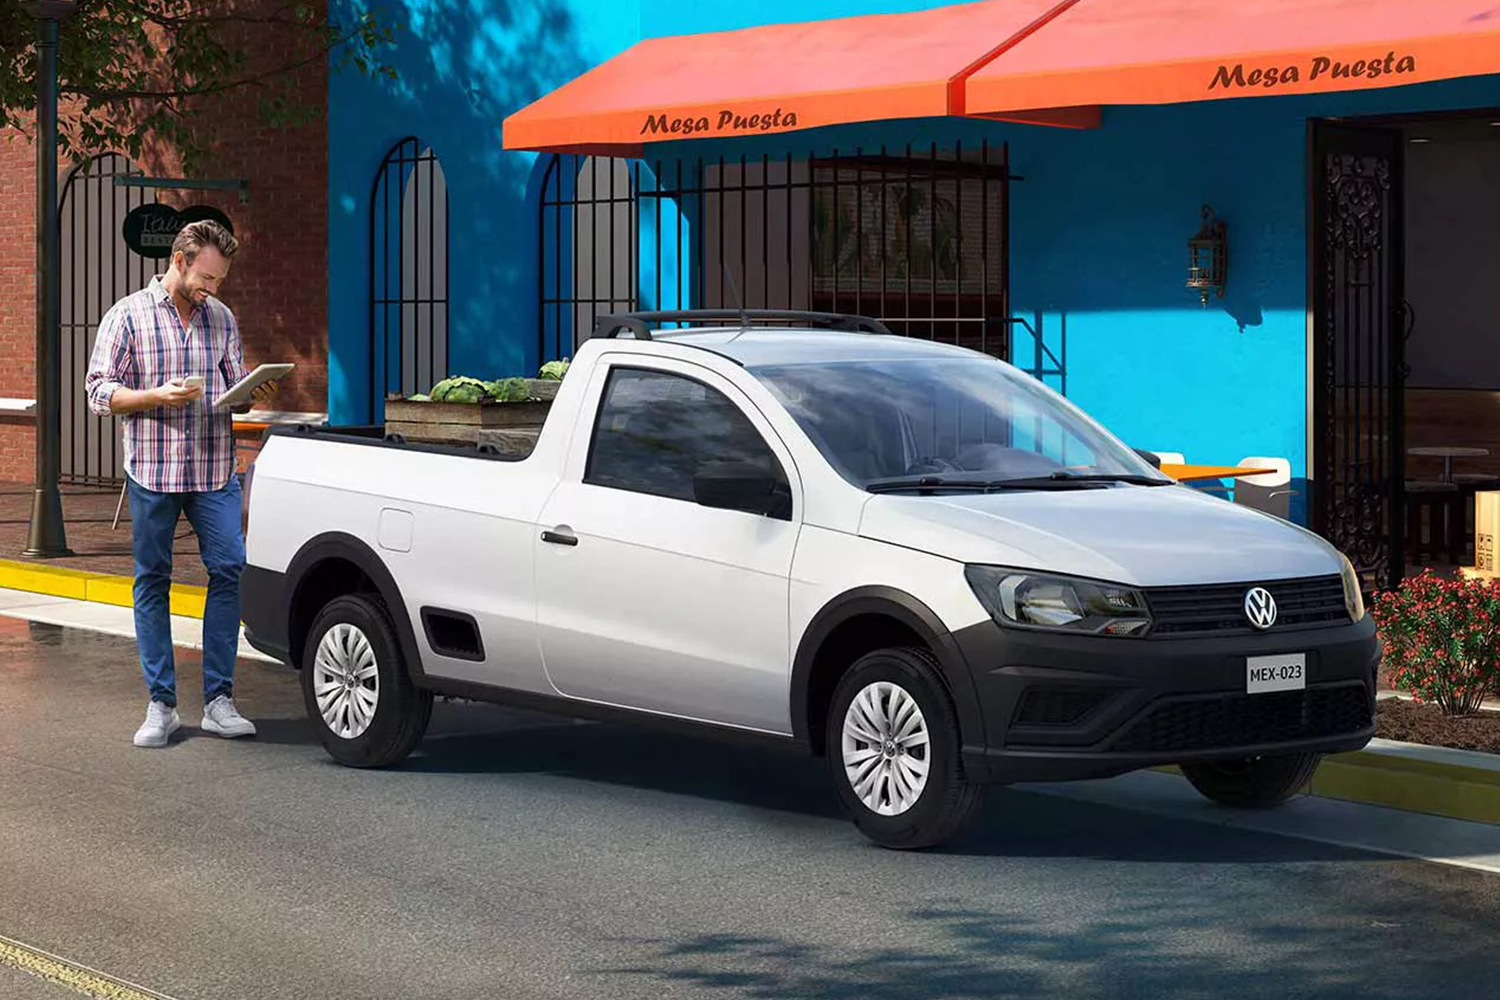 A man standing next to a white Volkswagen Saveiro, a compact pickup truck not available in the U.S.